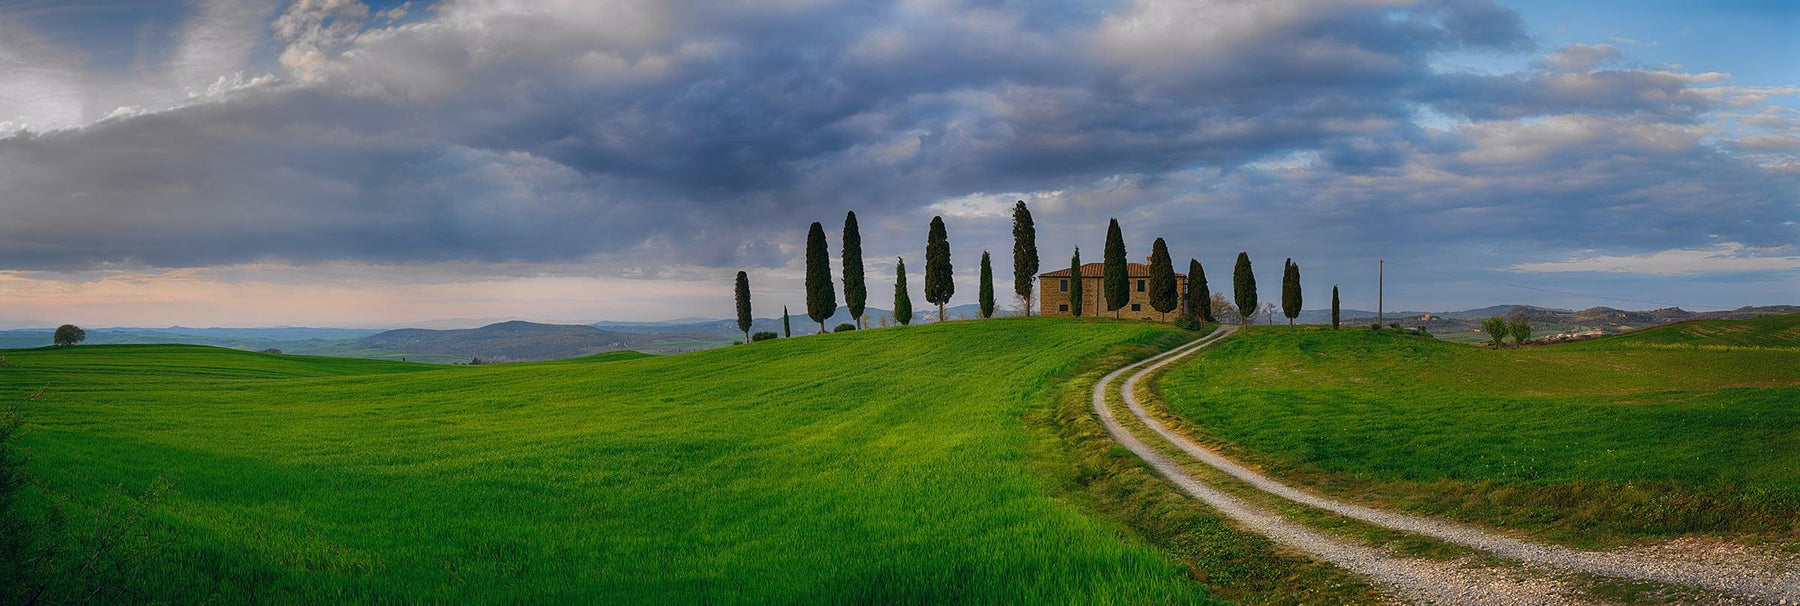 Dirt road leading through a green grass field to a stone house surrounded by cypress trees in Tuscany Italy